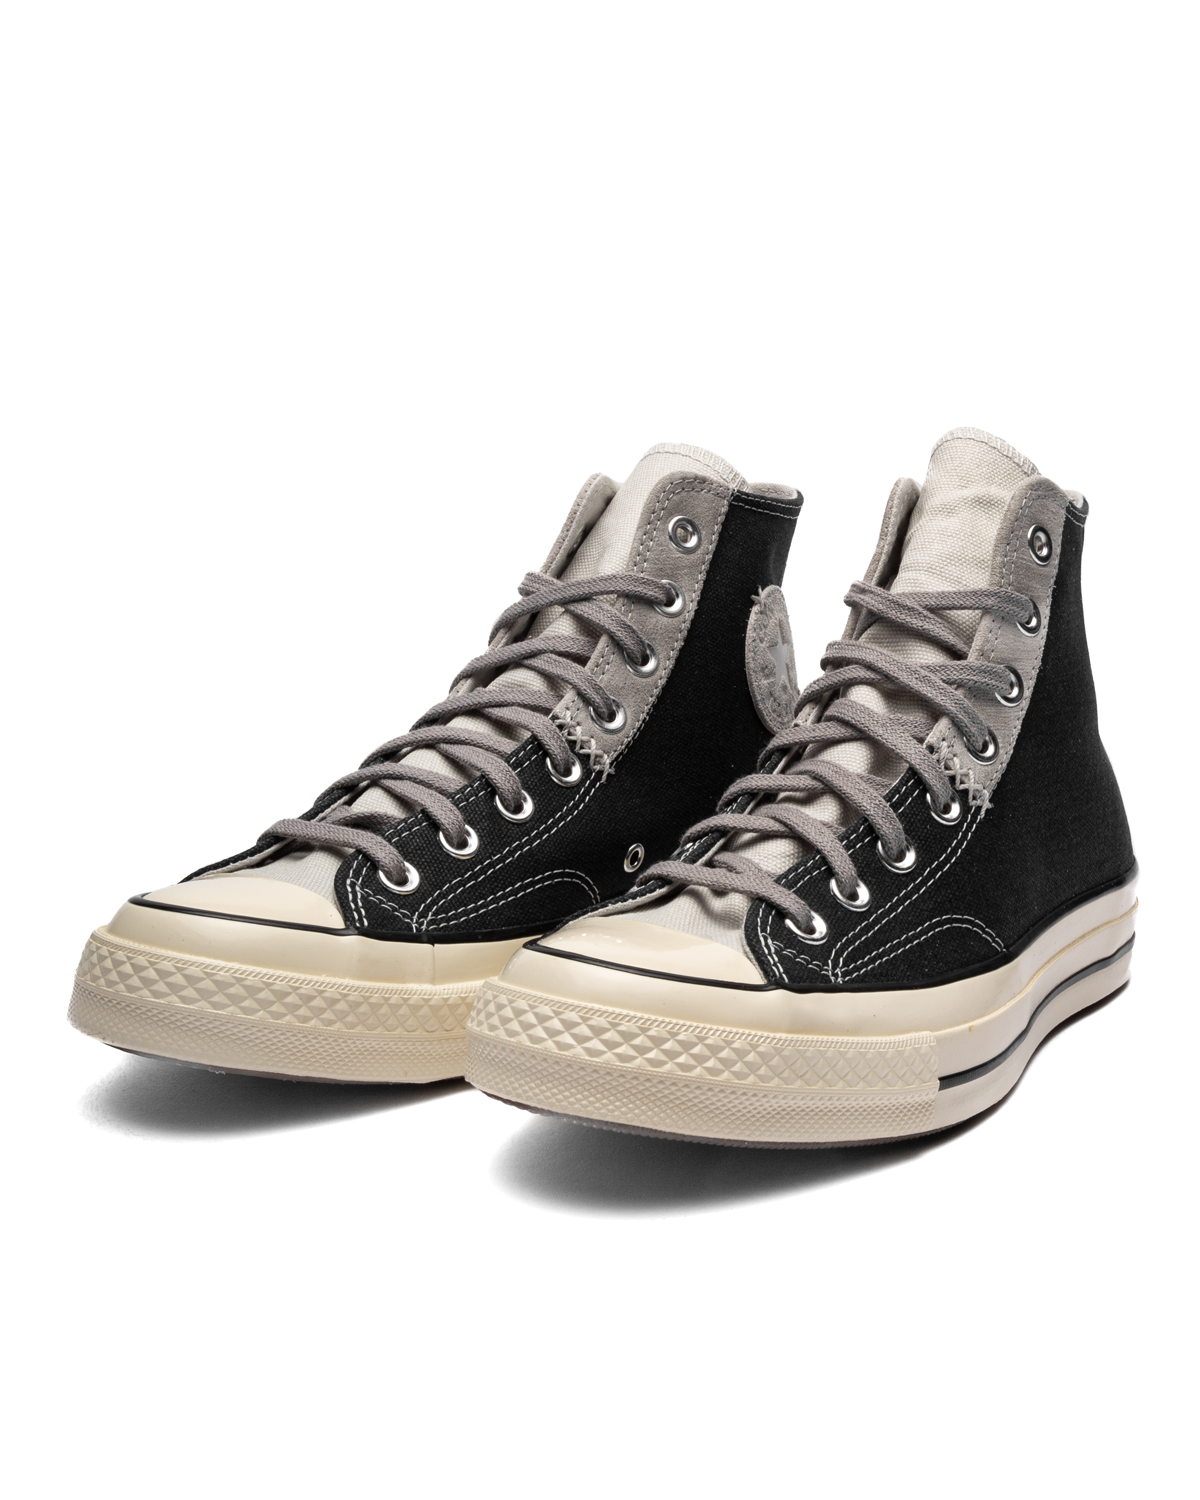 Chuck 70 High Mixed Materials Black/Fossilized/Total Neutral